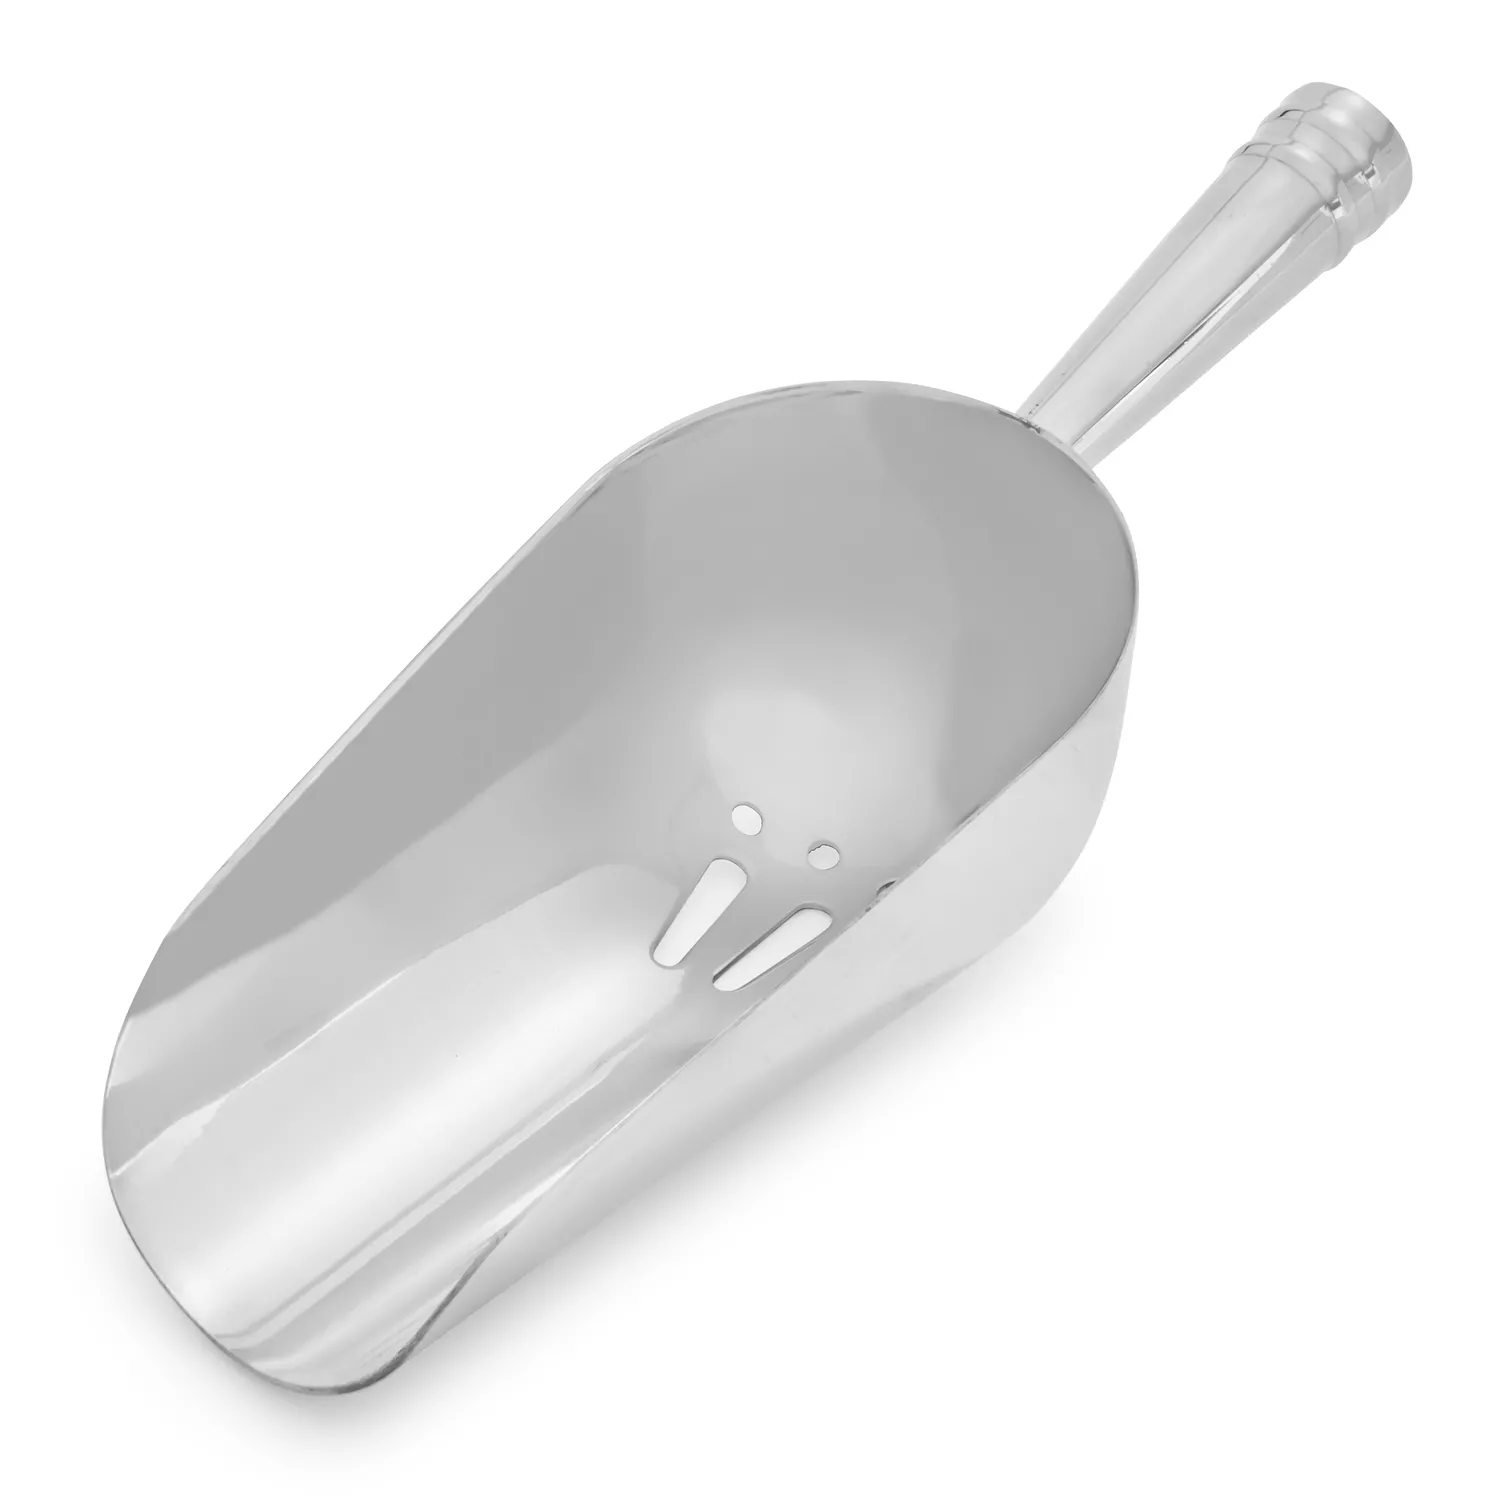 Hubert Solid Stainless Steel Ice Scoop - 9 1/4L x 3 1/4W